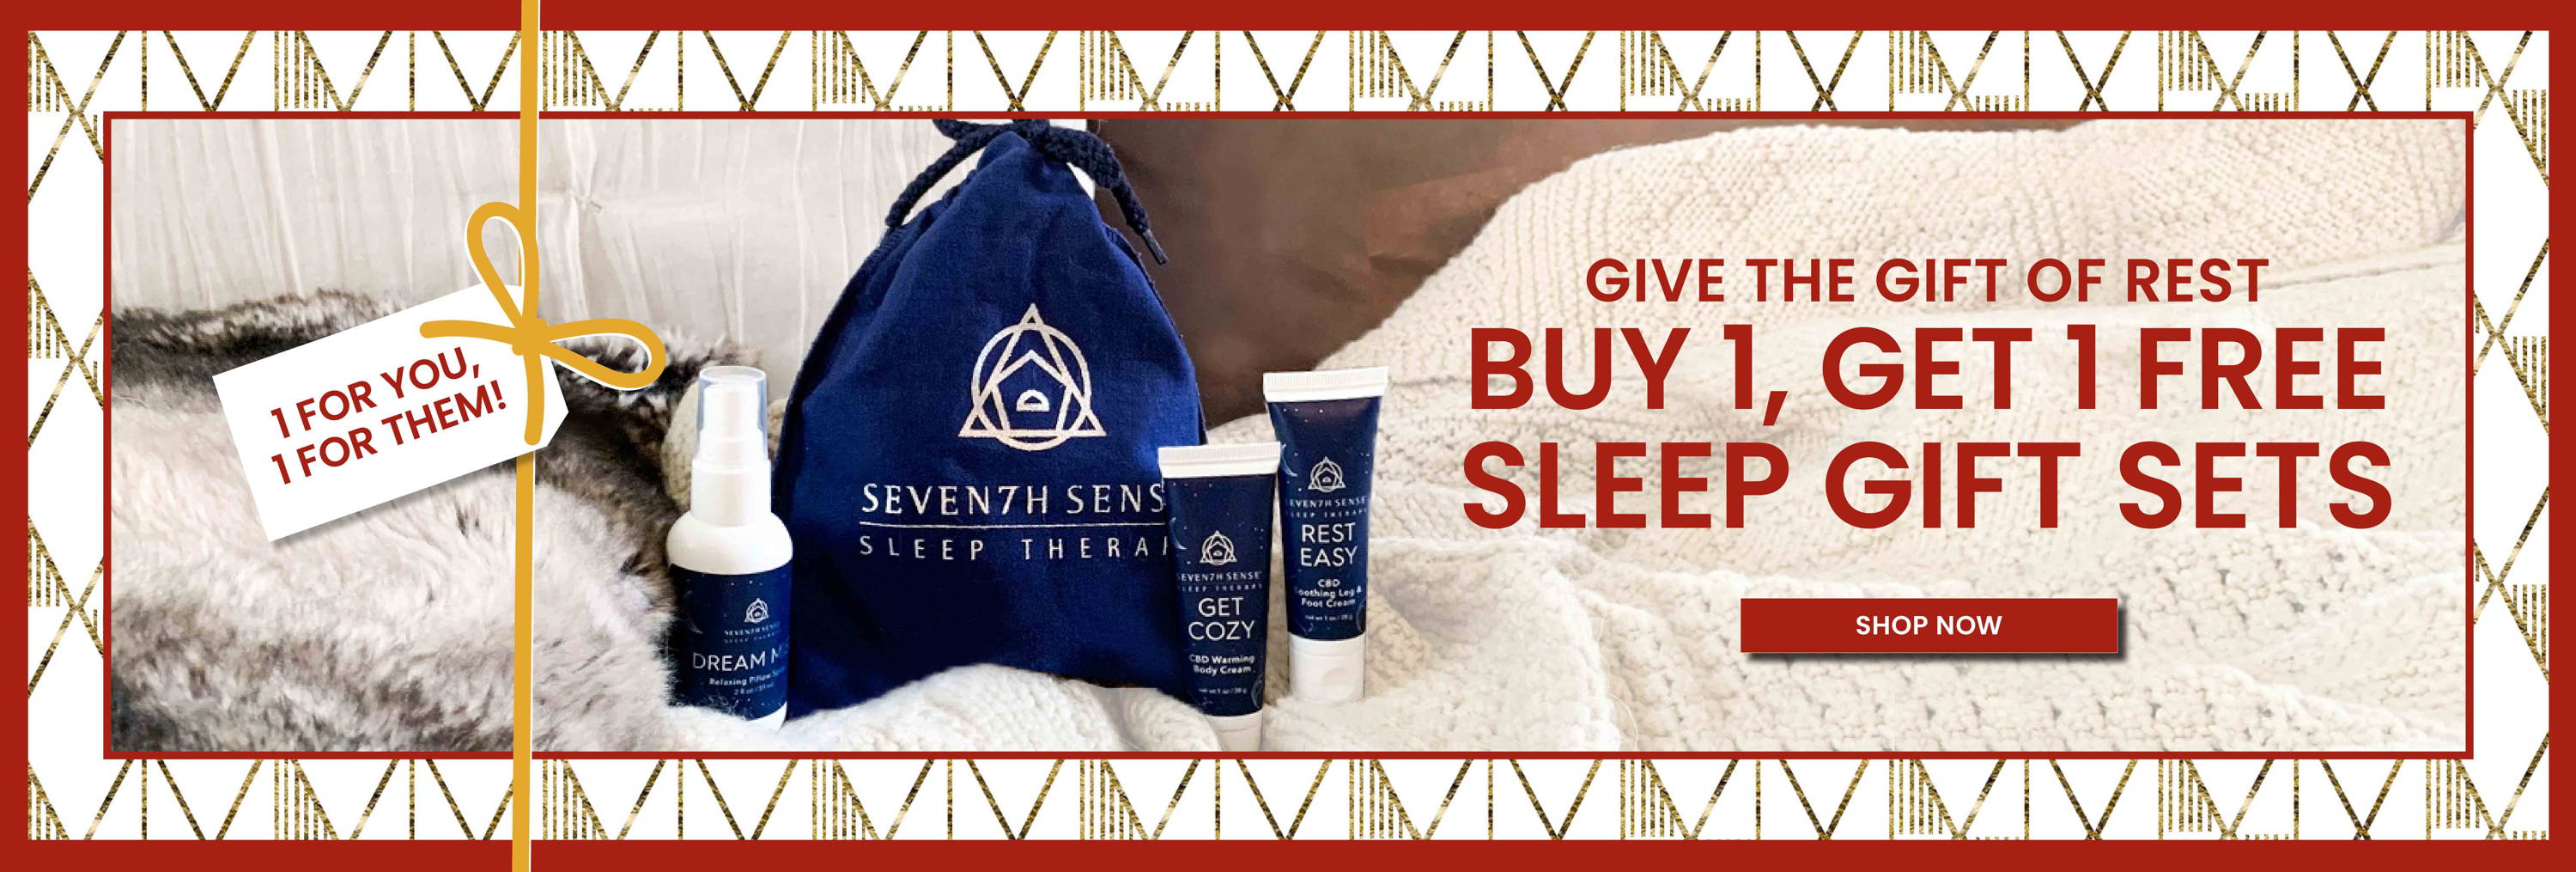 Buy 1, Get 1 Free Sleep Therapy Gift Sets. While supplies last.